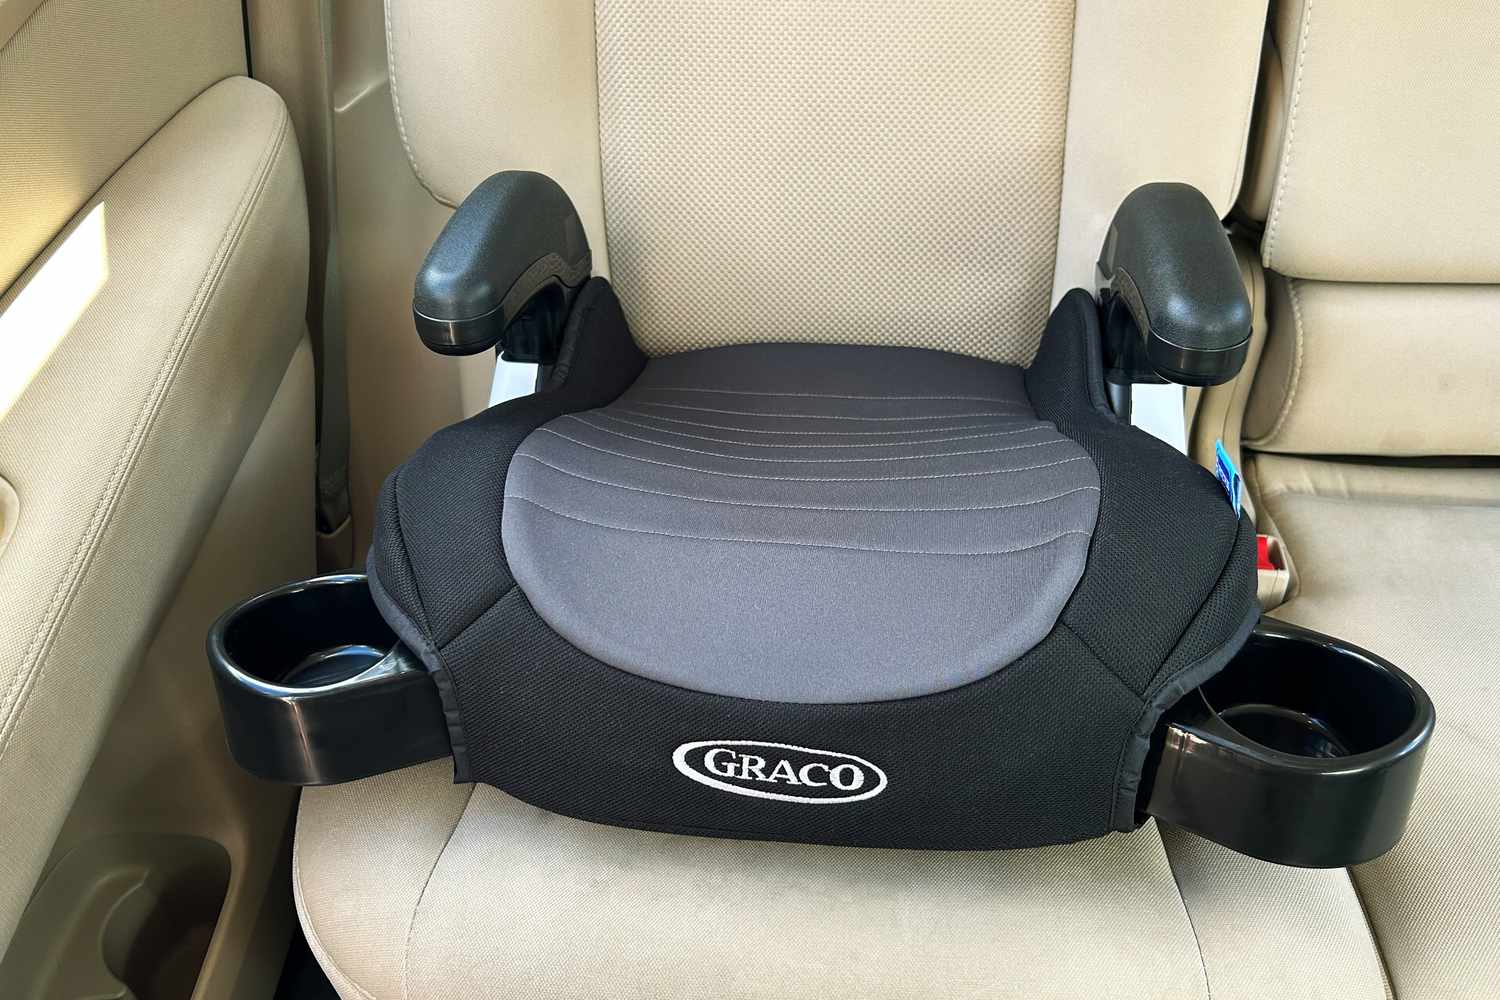 The Graco TurboBooster 2.0 Backless Booster installed in the backseat of a car